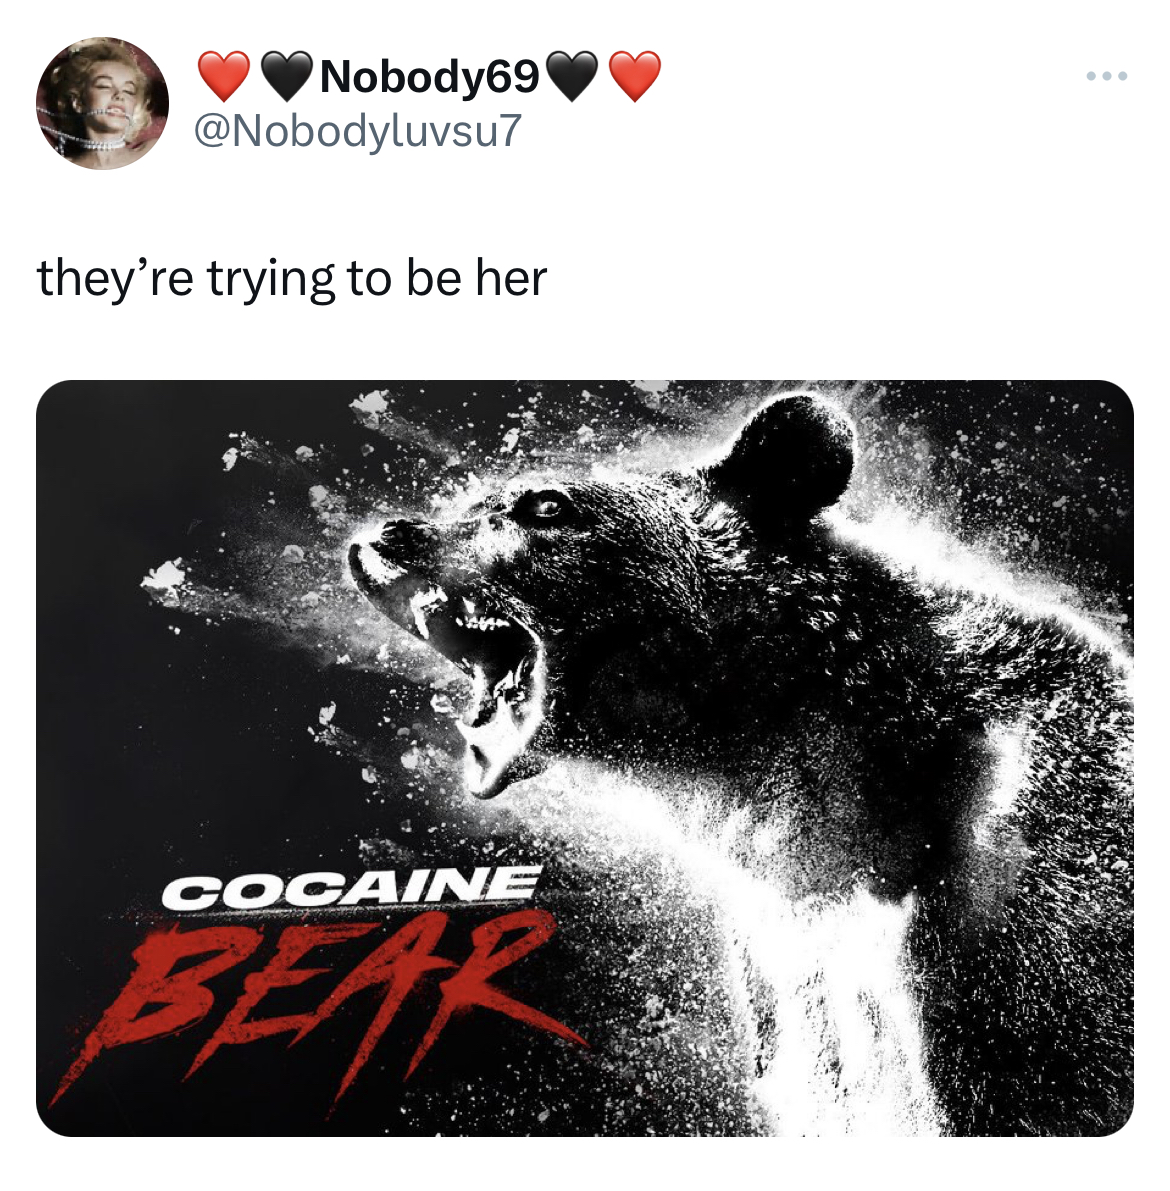 Ohio Cocaine Cat memes - cocaine bear story - Nobody69 they're trying to be her Cocaine www